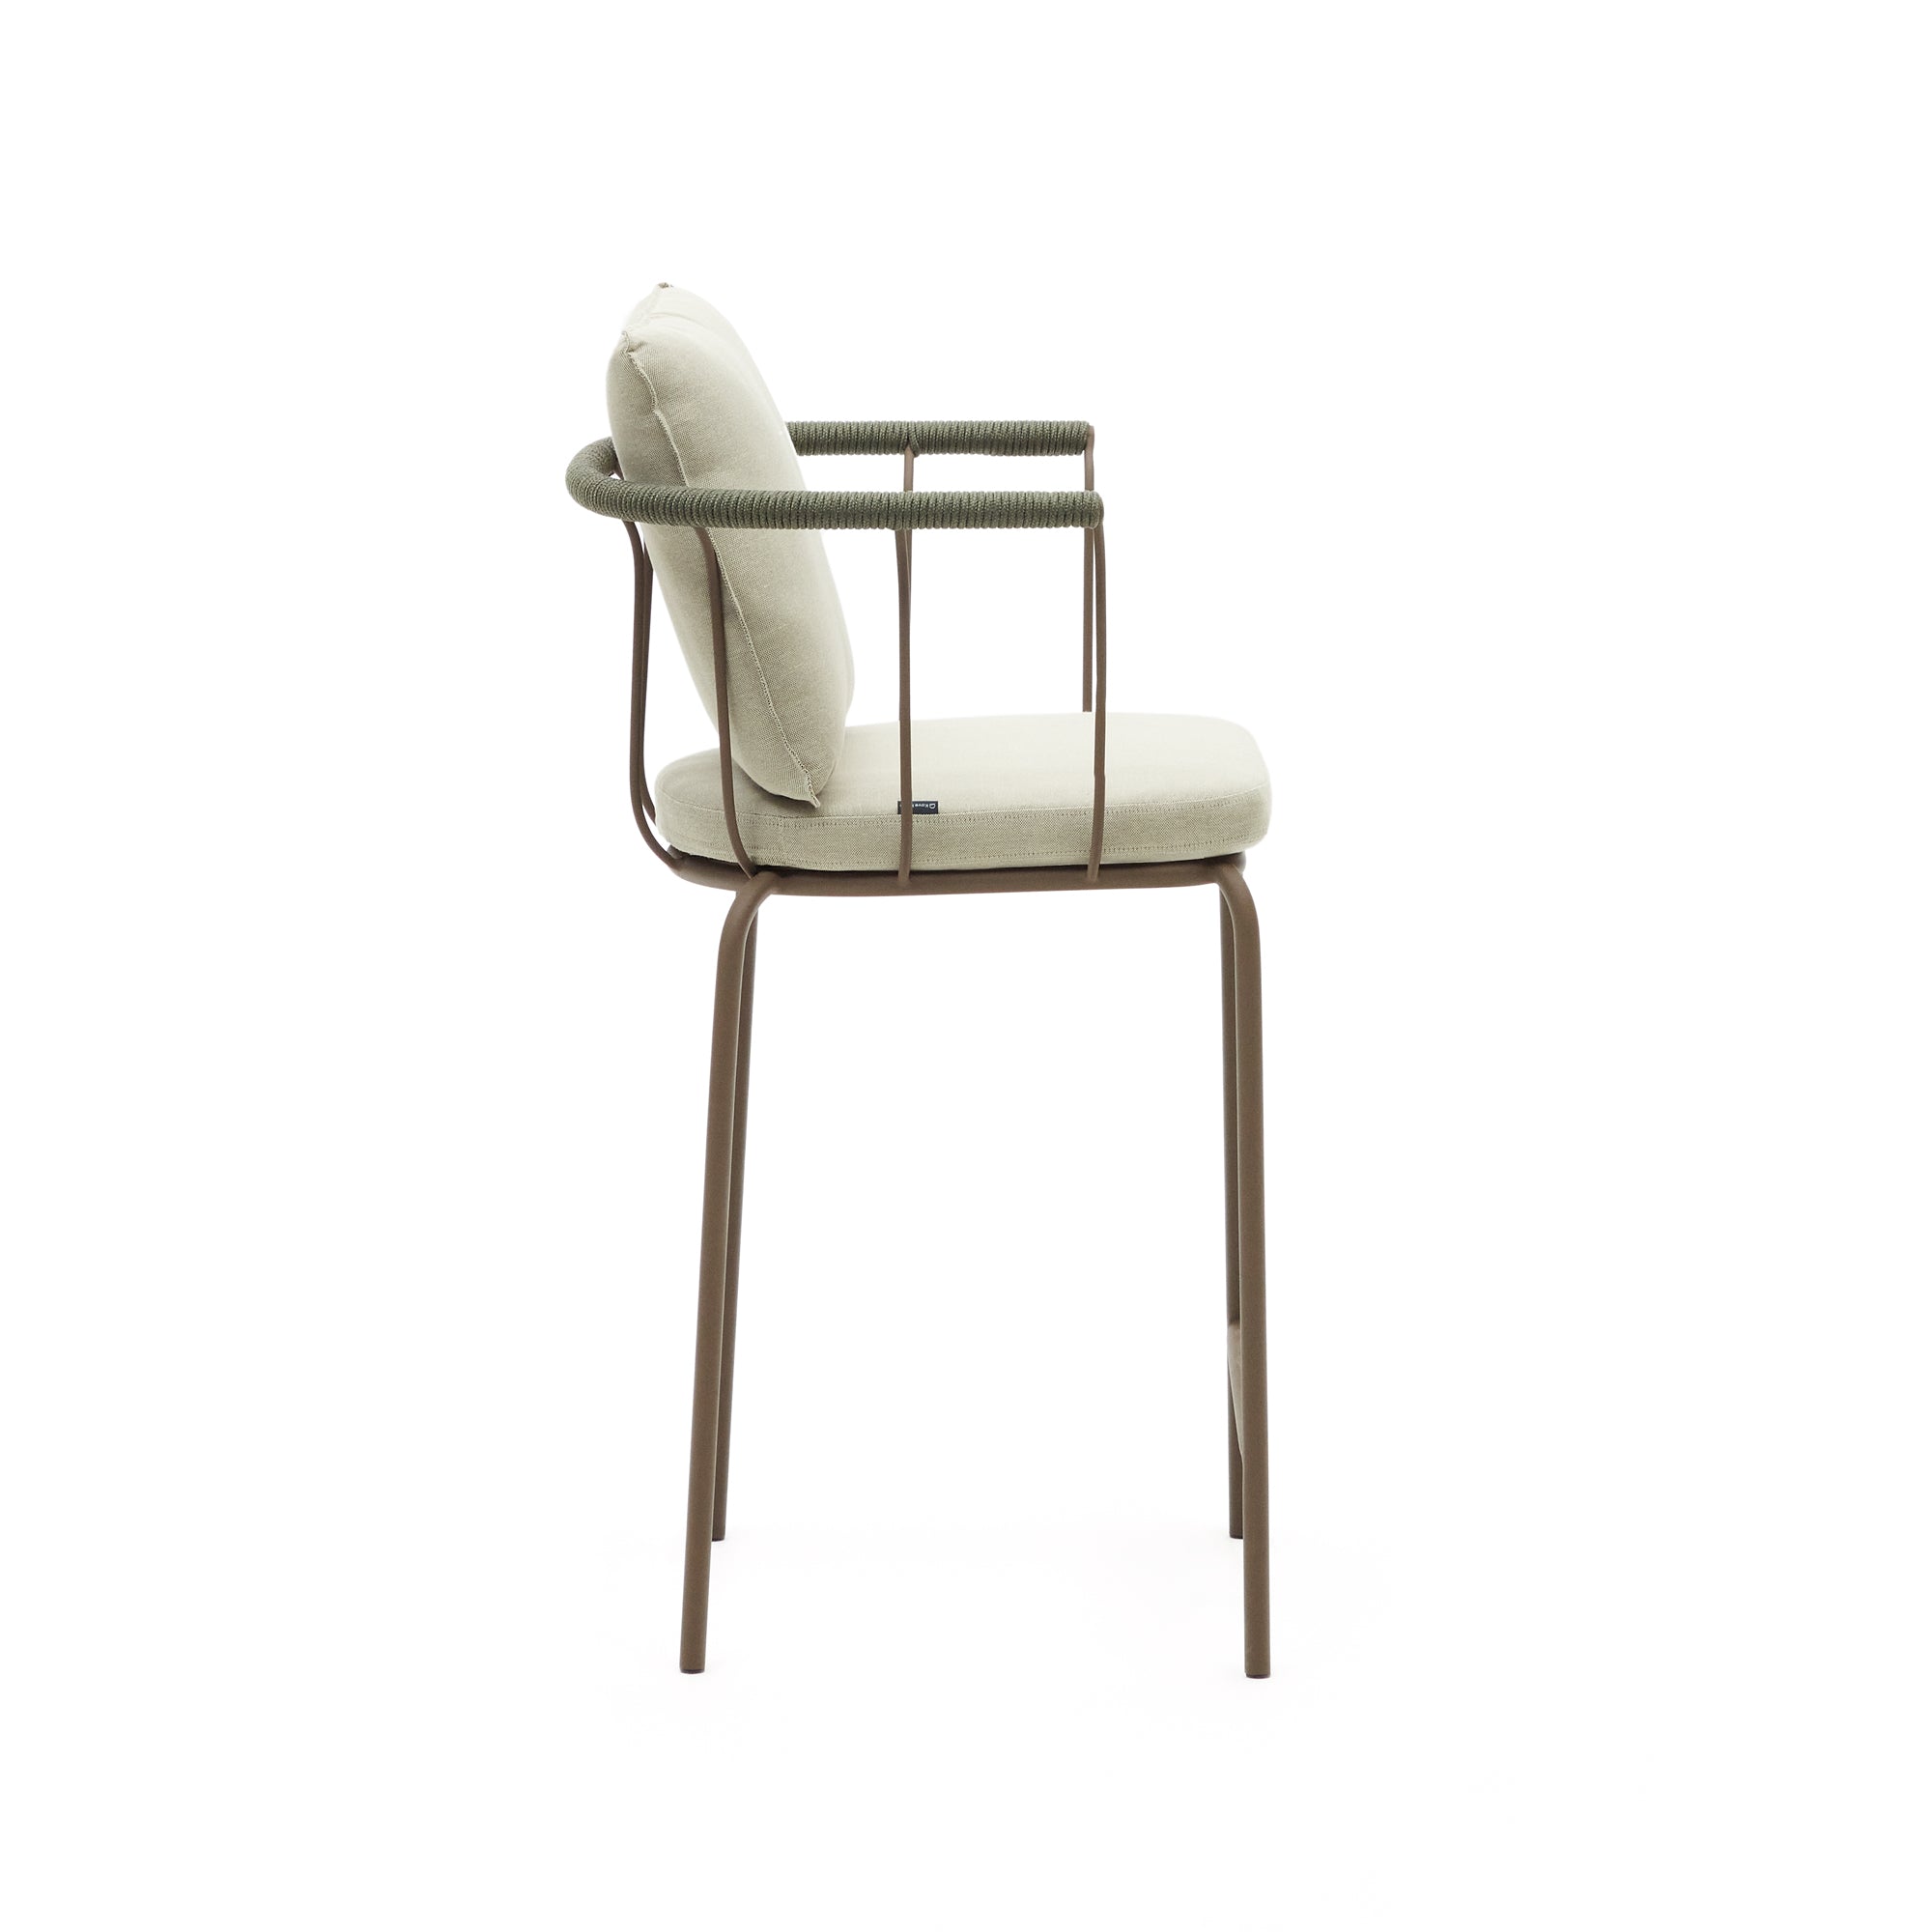 Salguer stackable stool in cord and steel with a brown painted finish, 66 cm